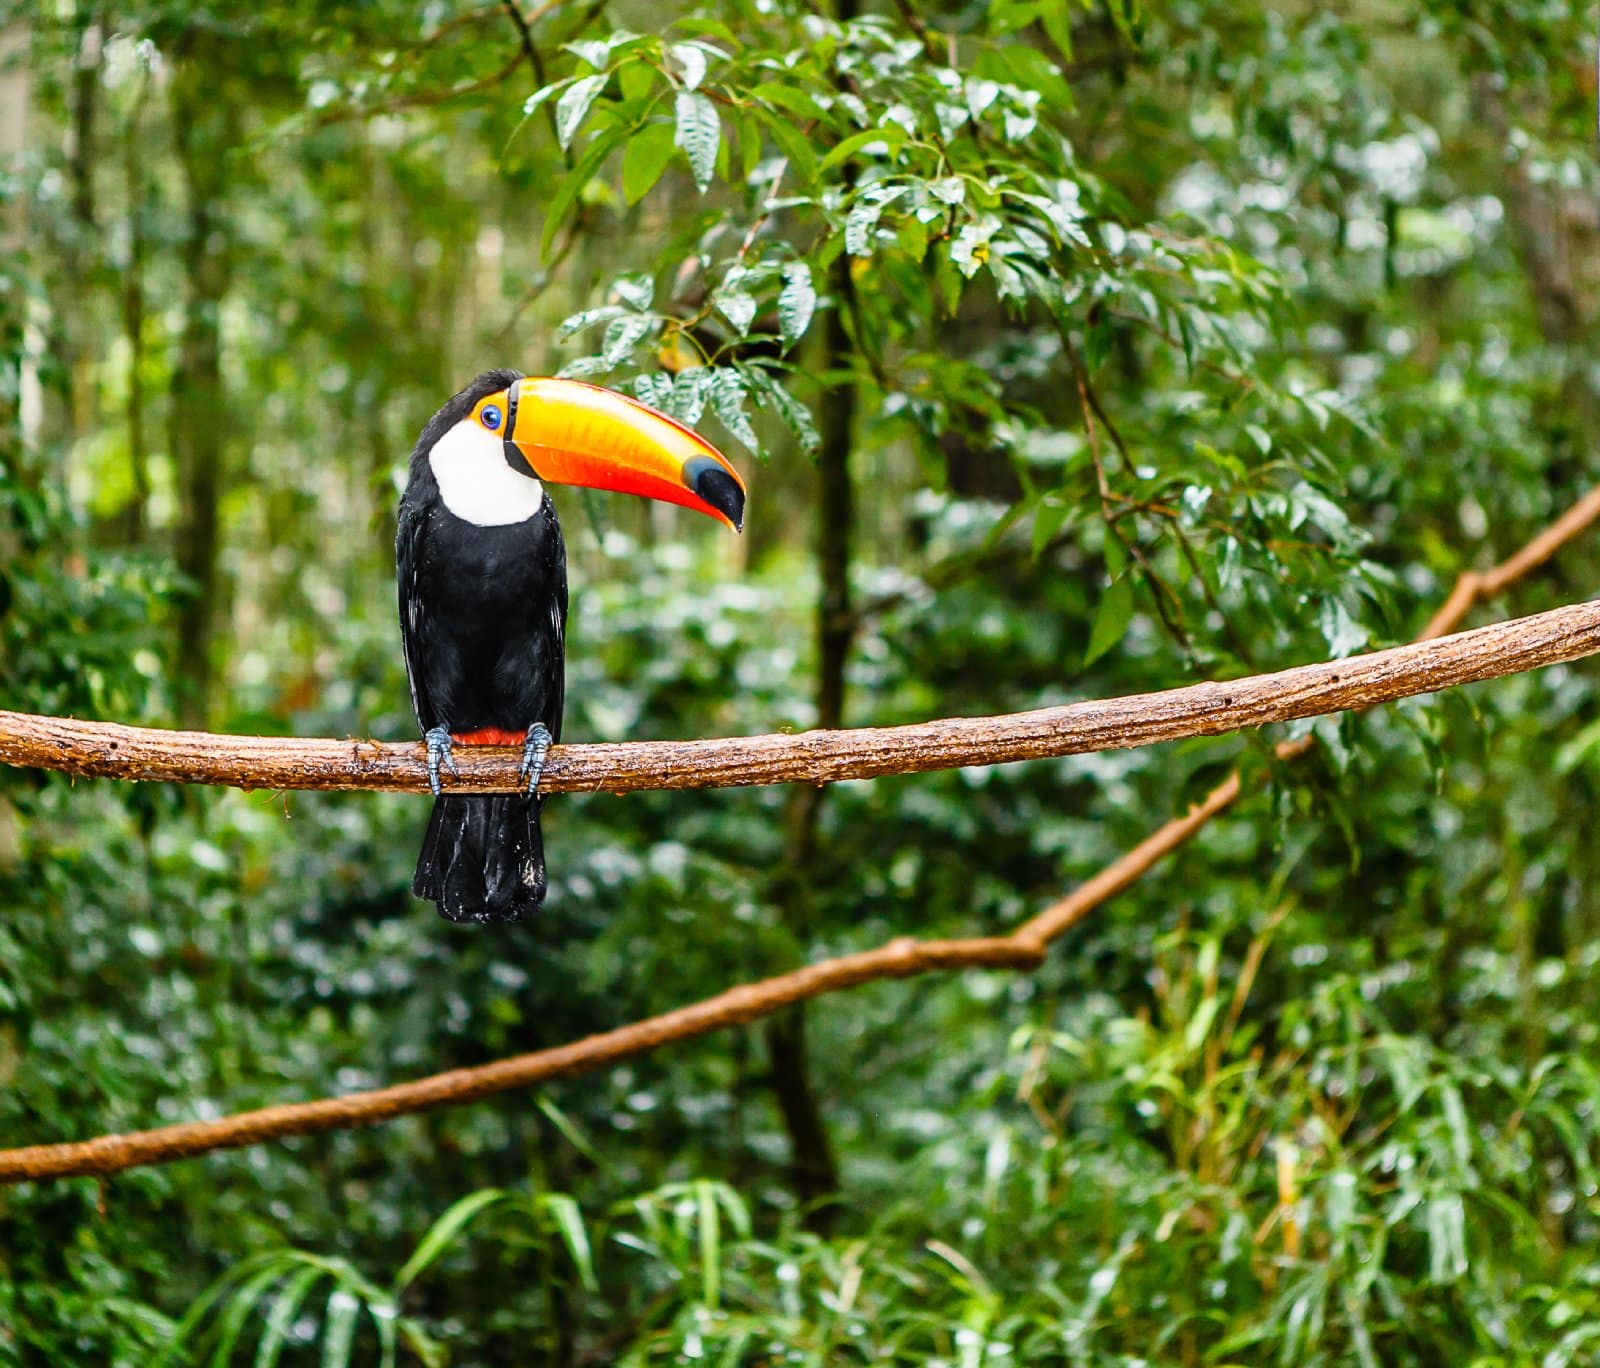 <p class="wp-caption-text">Image Credit: Shutterstock / MarcusVDT</p>  <p><span>The Amazon’s rich biodiversity is not only the basis of its shamanic practices but also a critical component of the global ecosystem. Engaging with the Amazon through a shamanic tour offers an unparalleled opportunity to learn about life’s interconnectedness, plants’ medicinal properties, and the importance of ecological balance.</span></p>